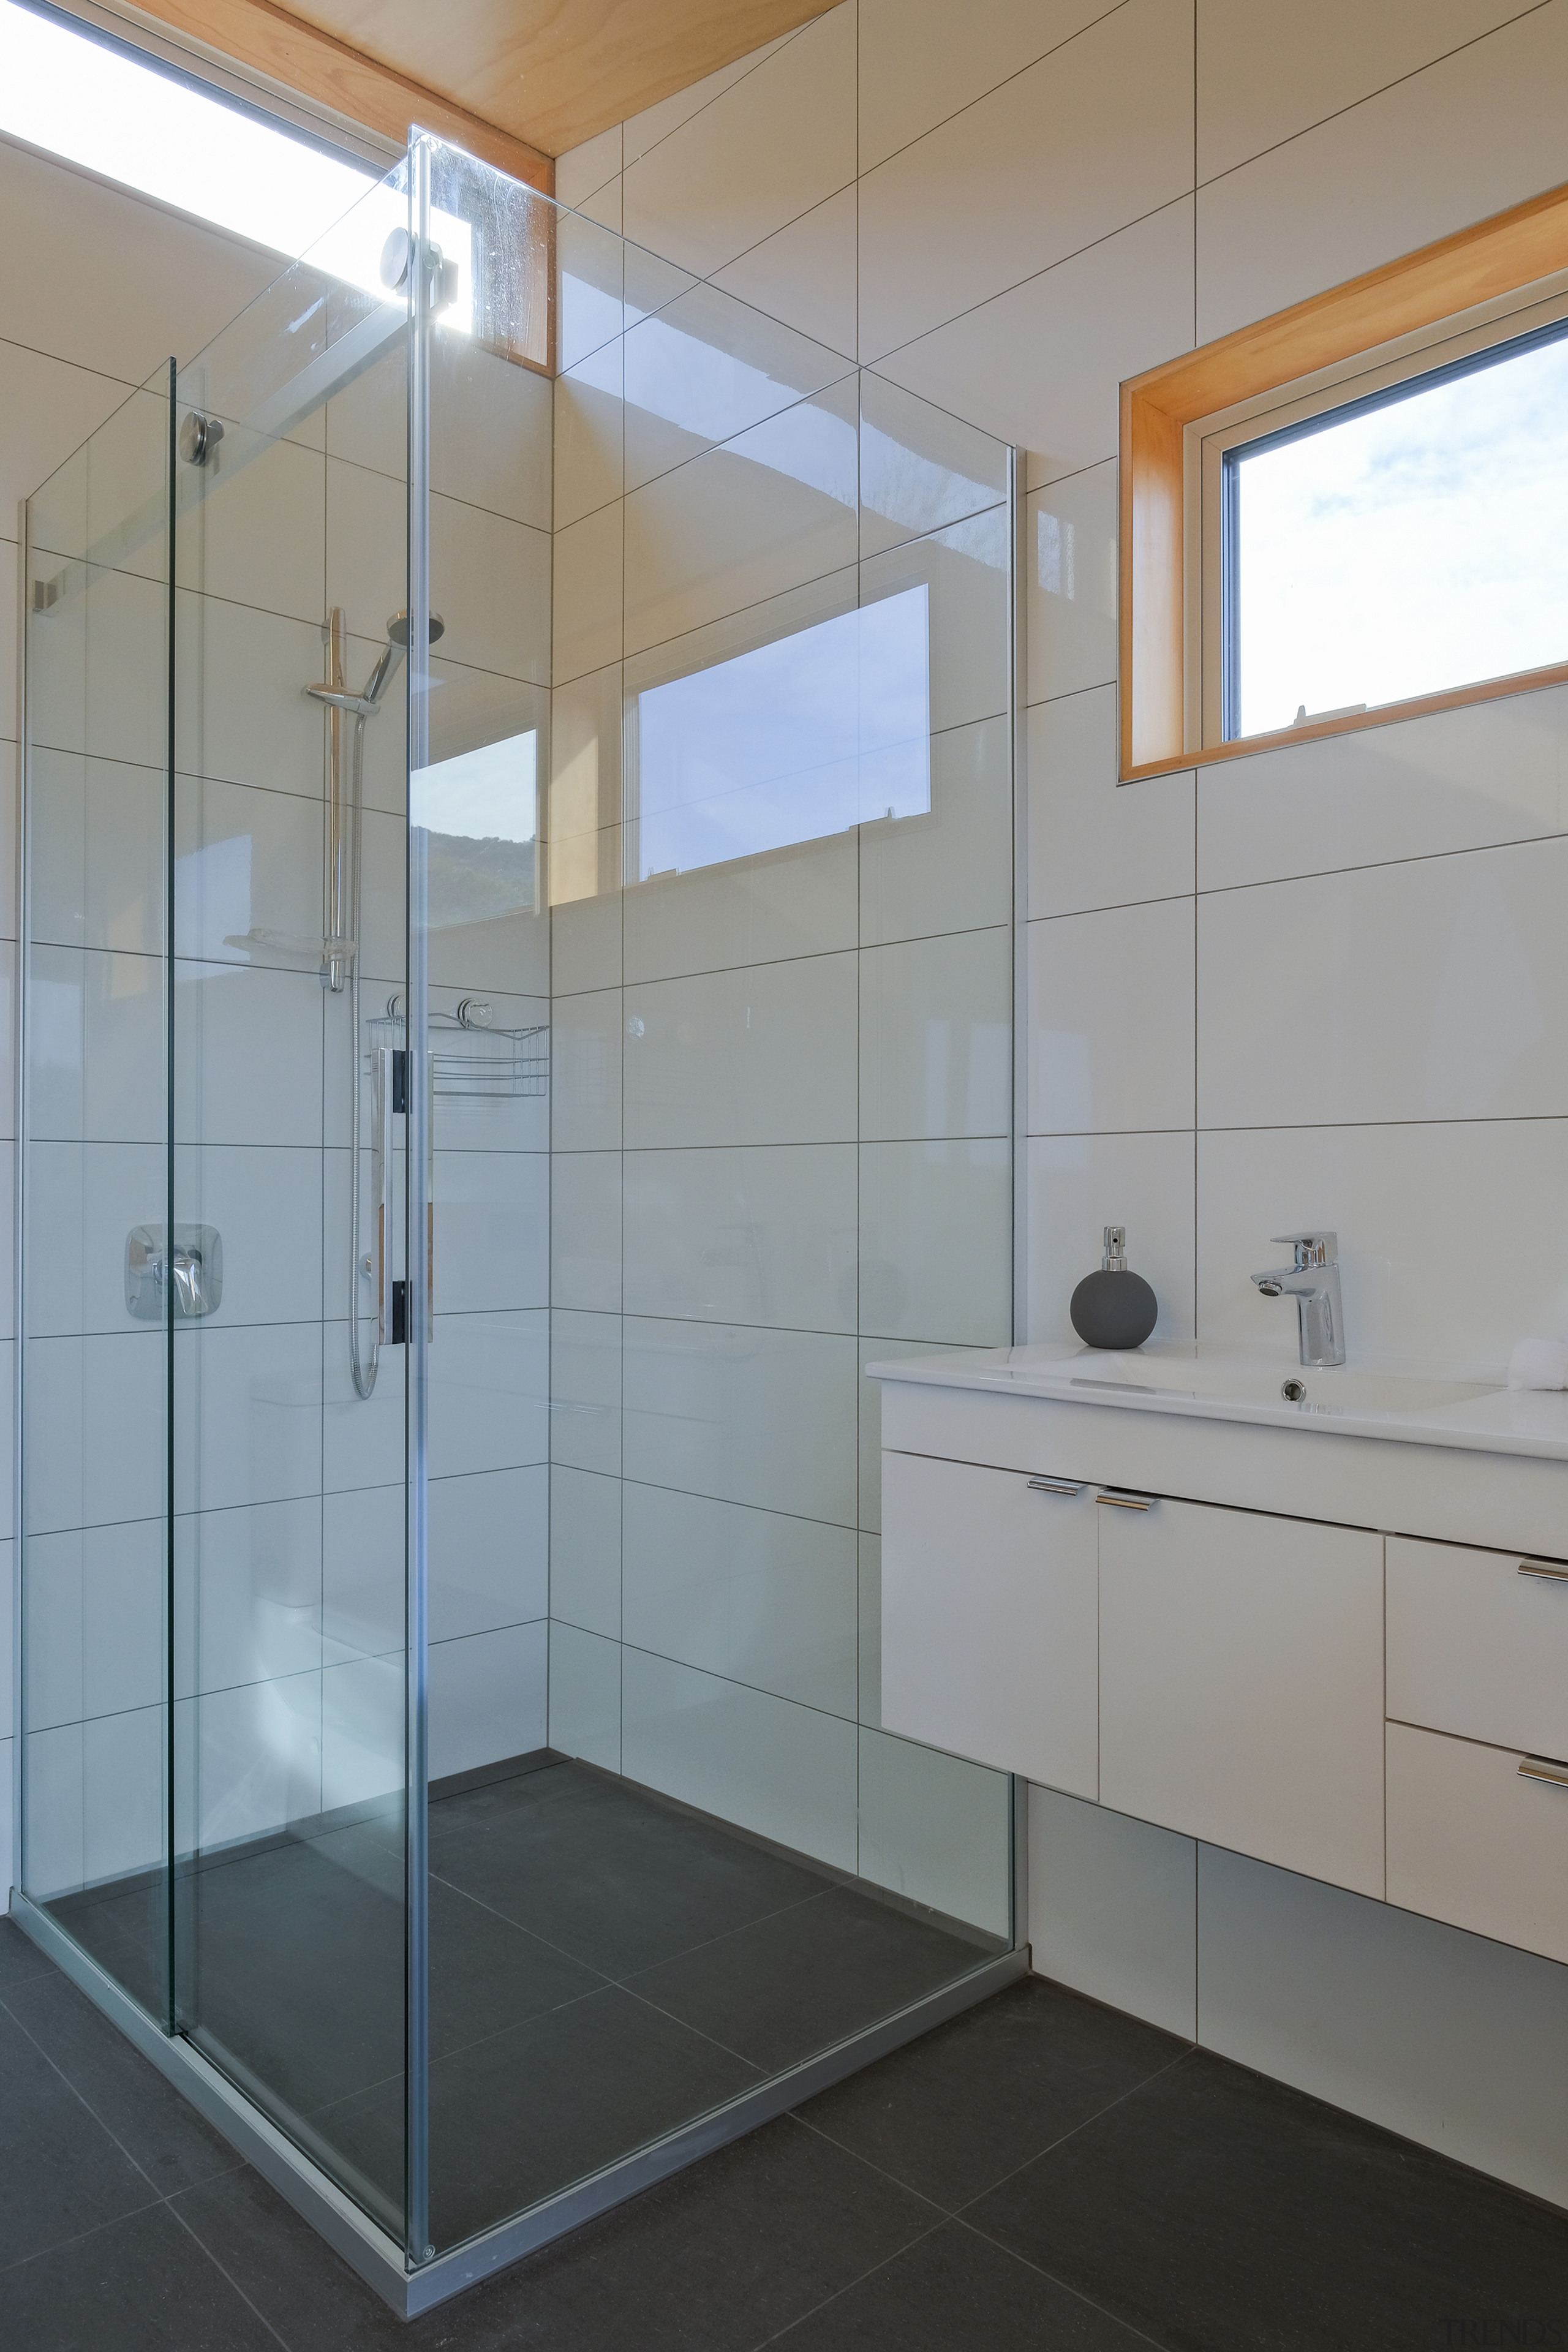 The master ensuite is private yet light filled, 